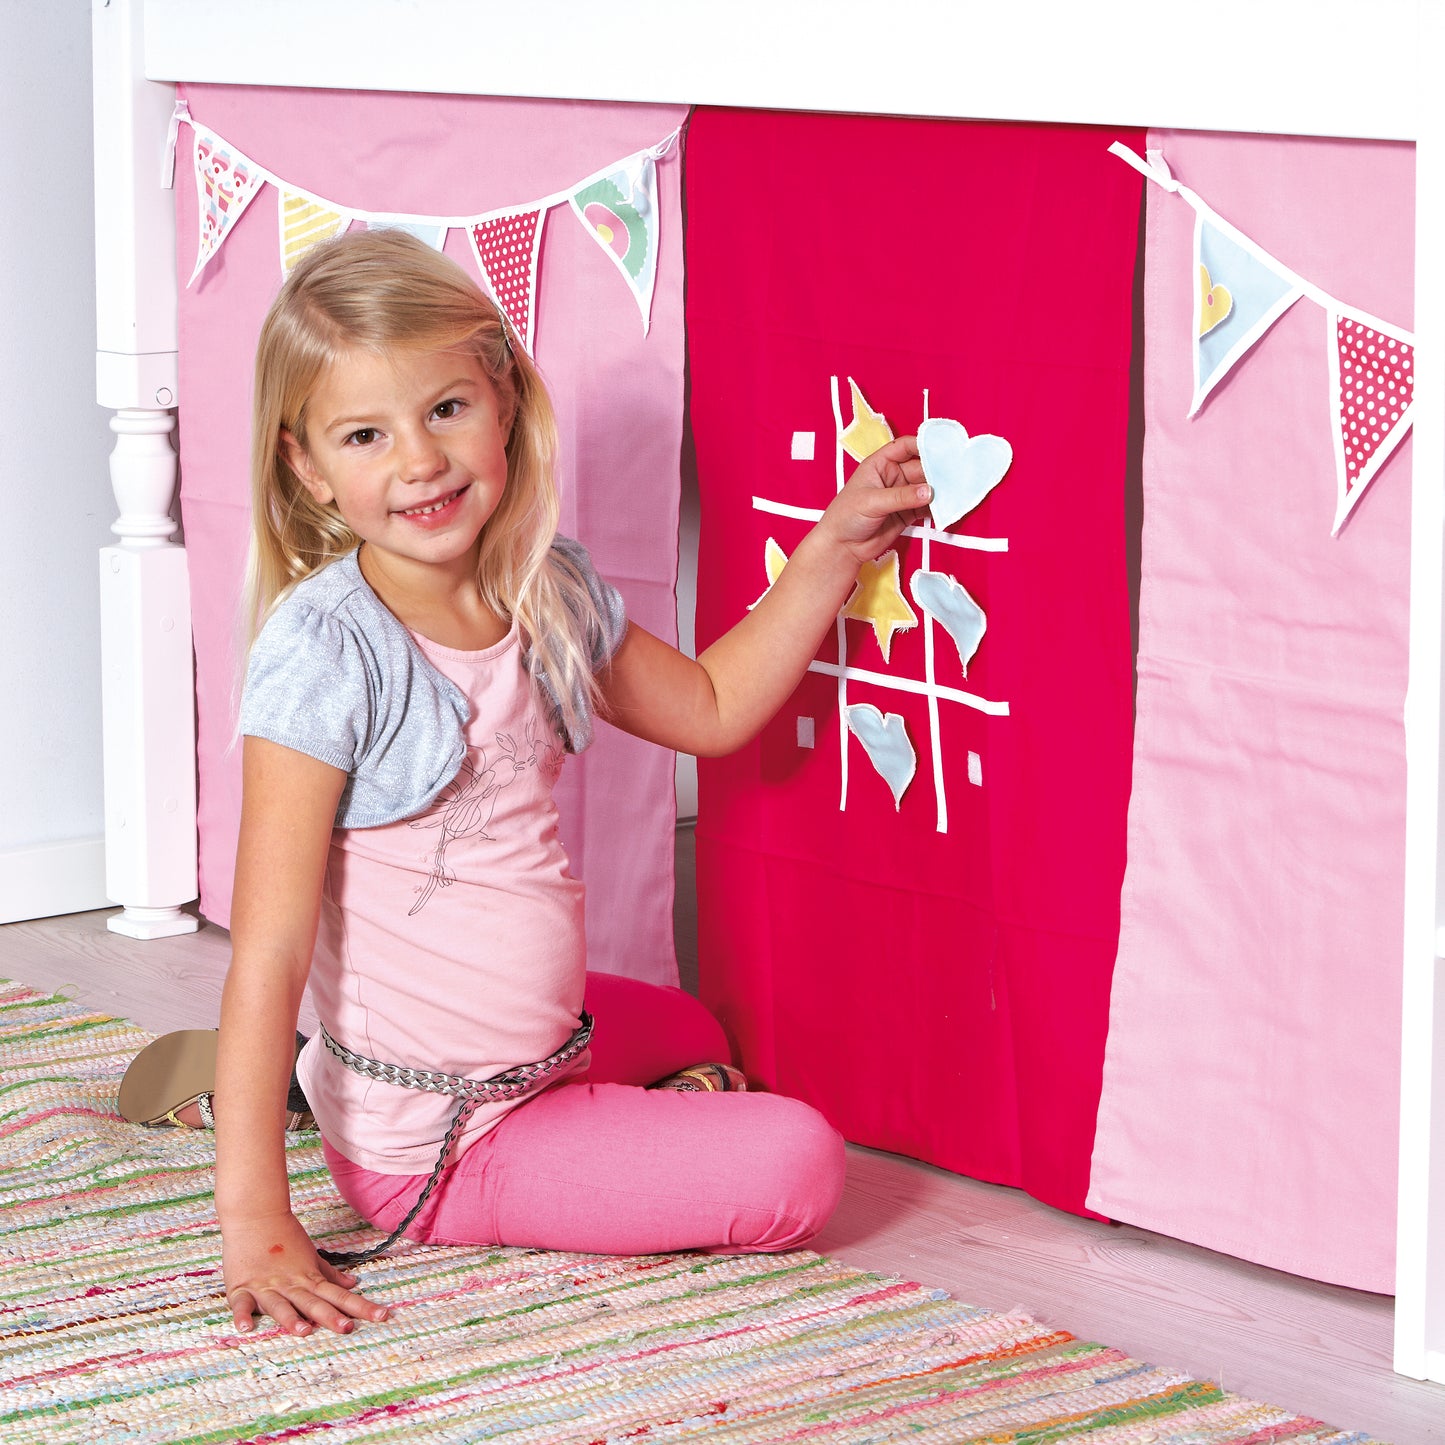 Manis-h  Interactive TicTacToe & Bunting Play Curtain